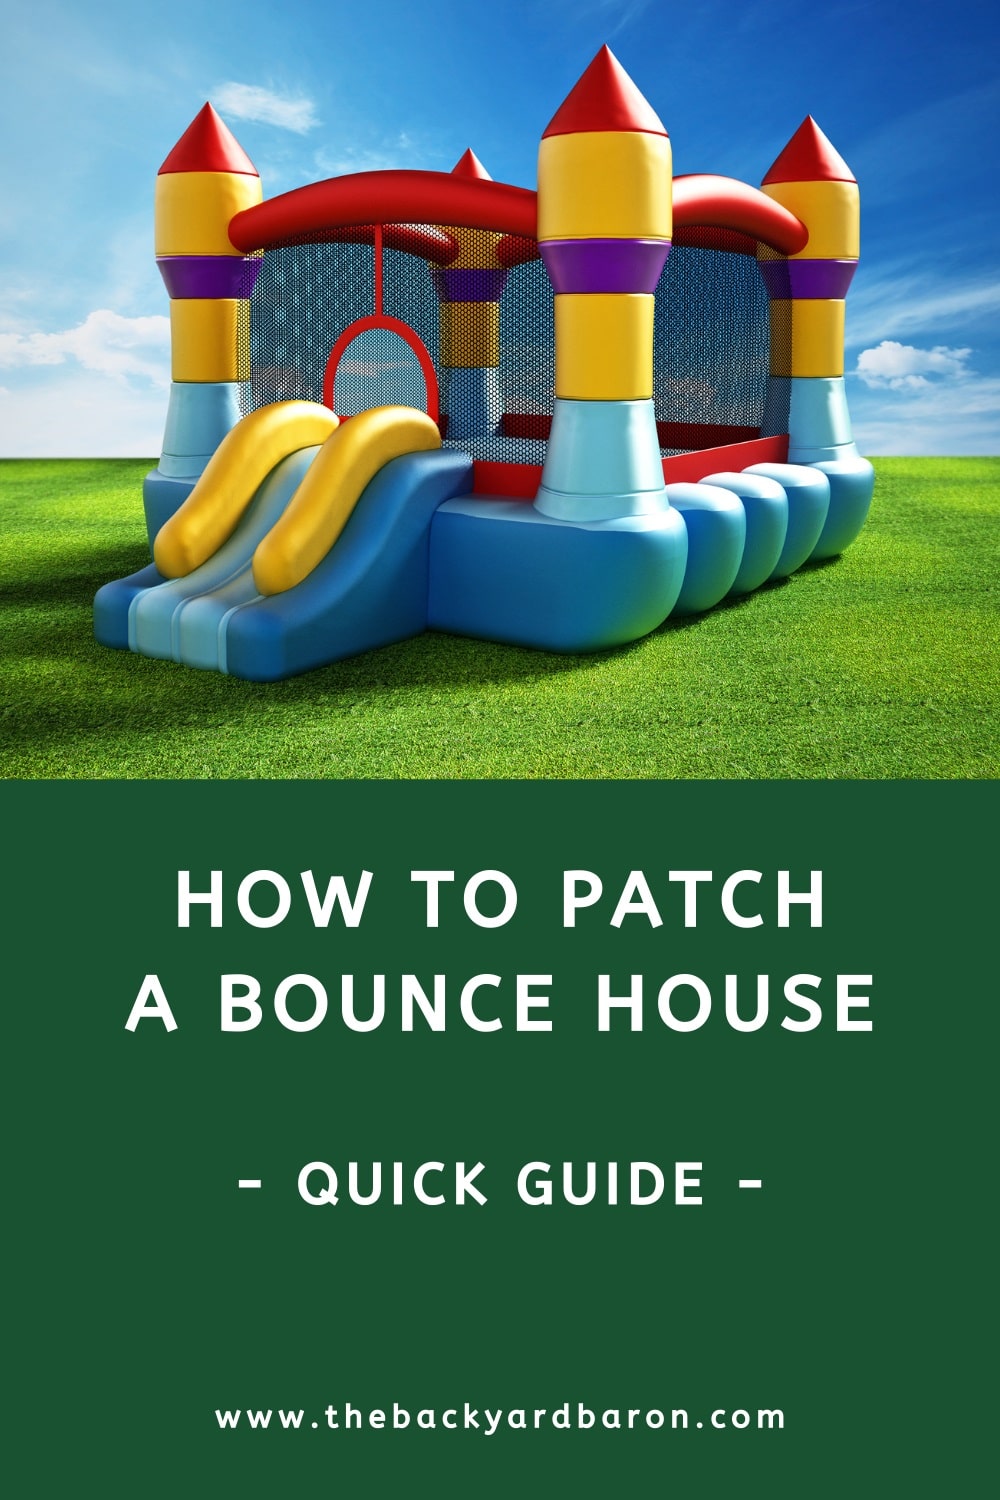 How to patch a bounce house (practical guide)